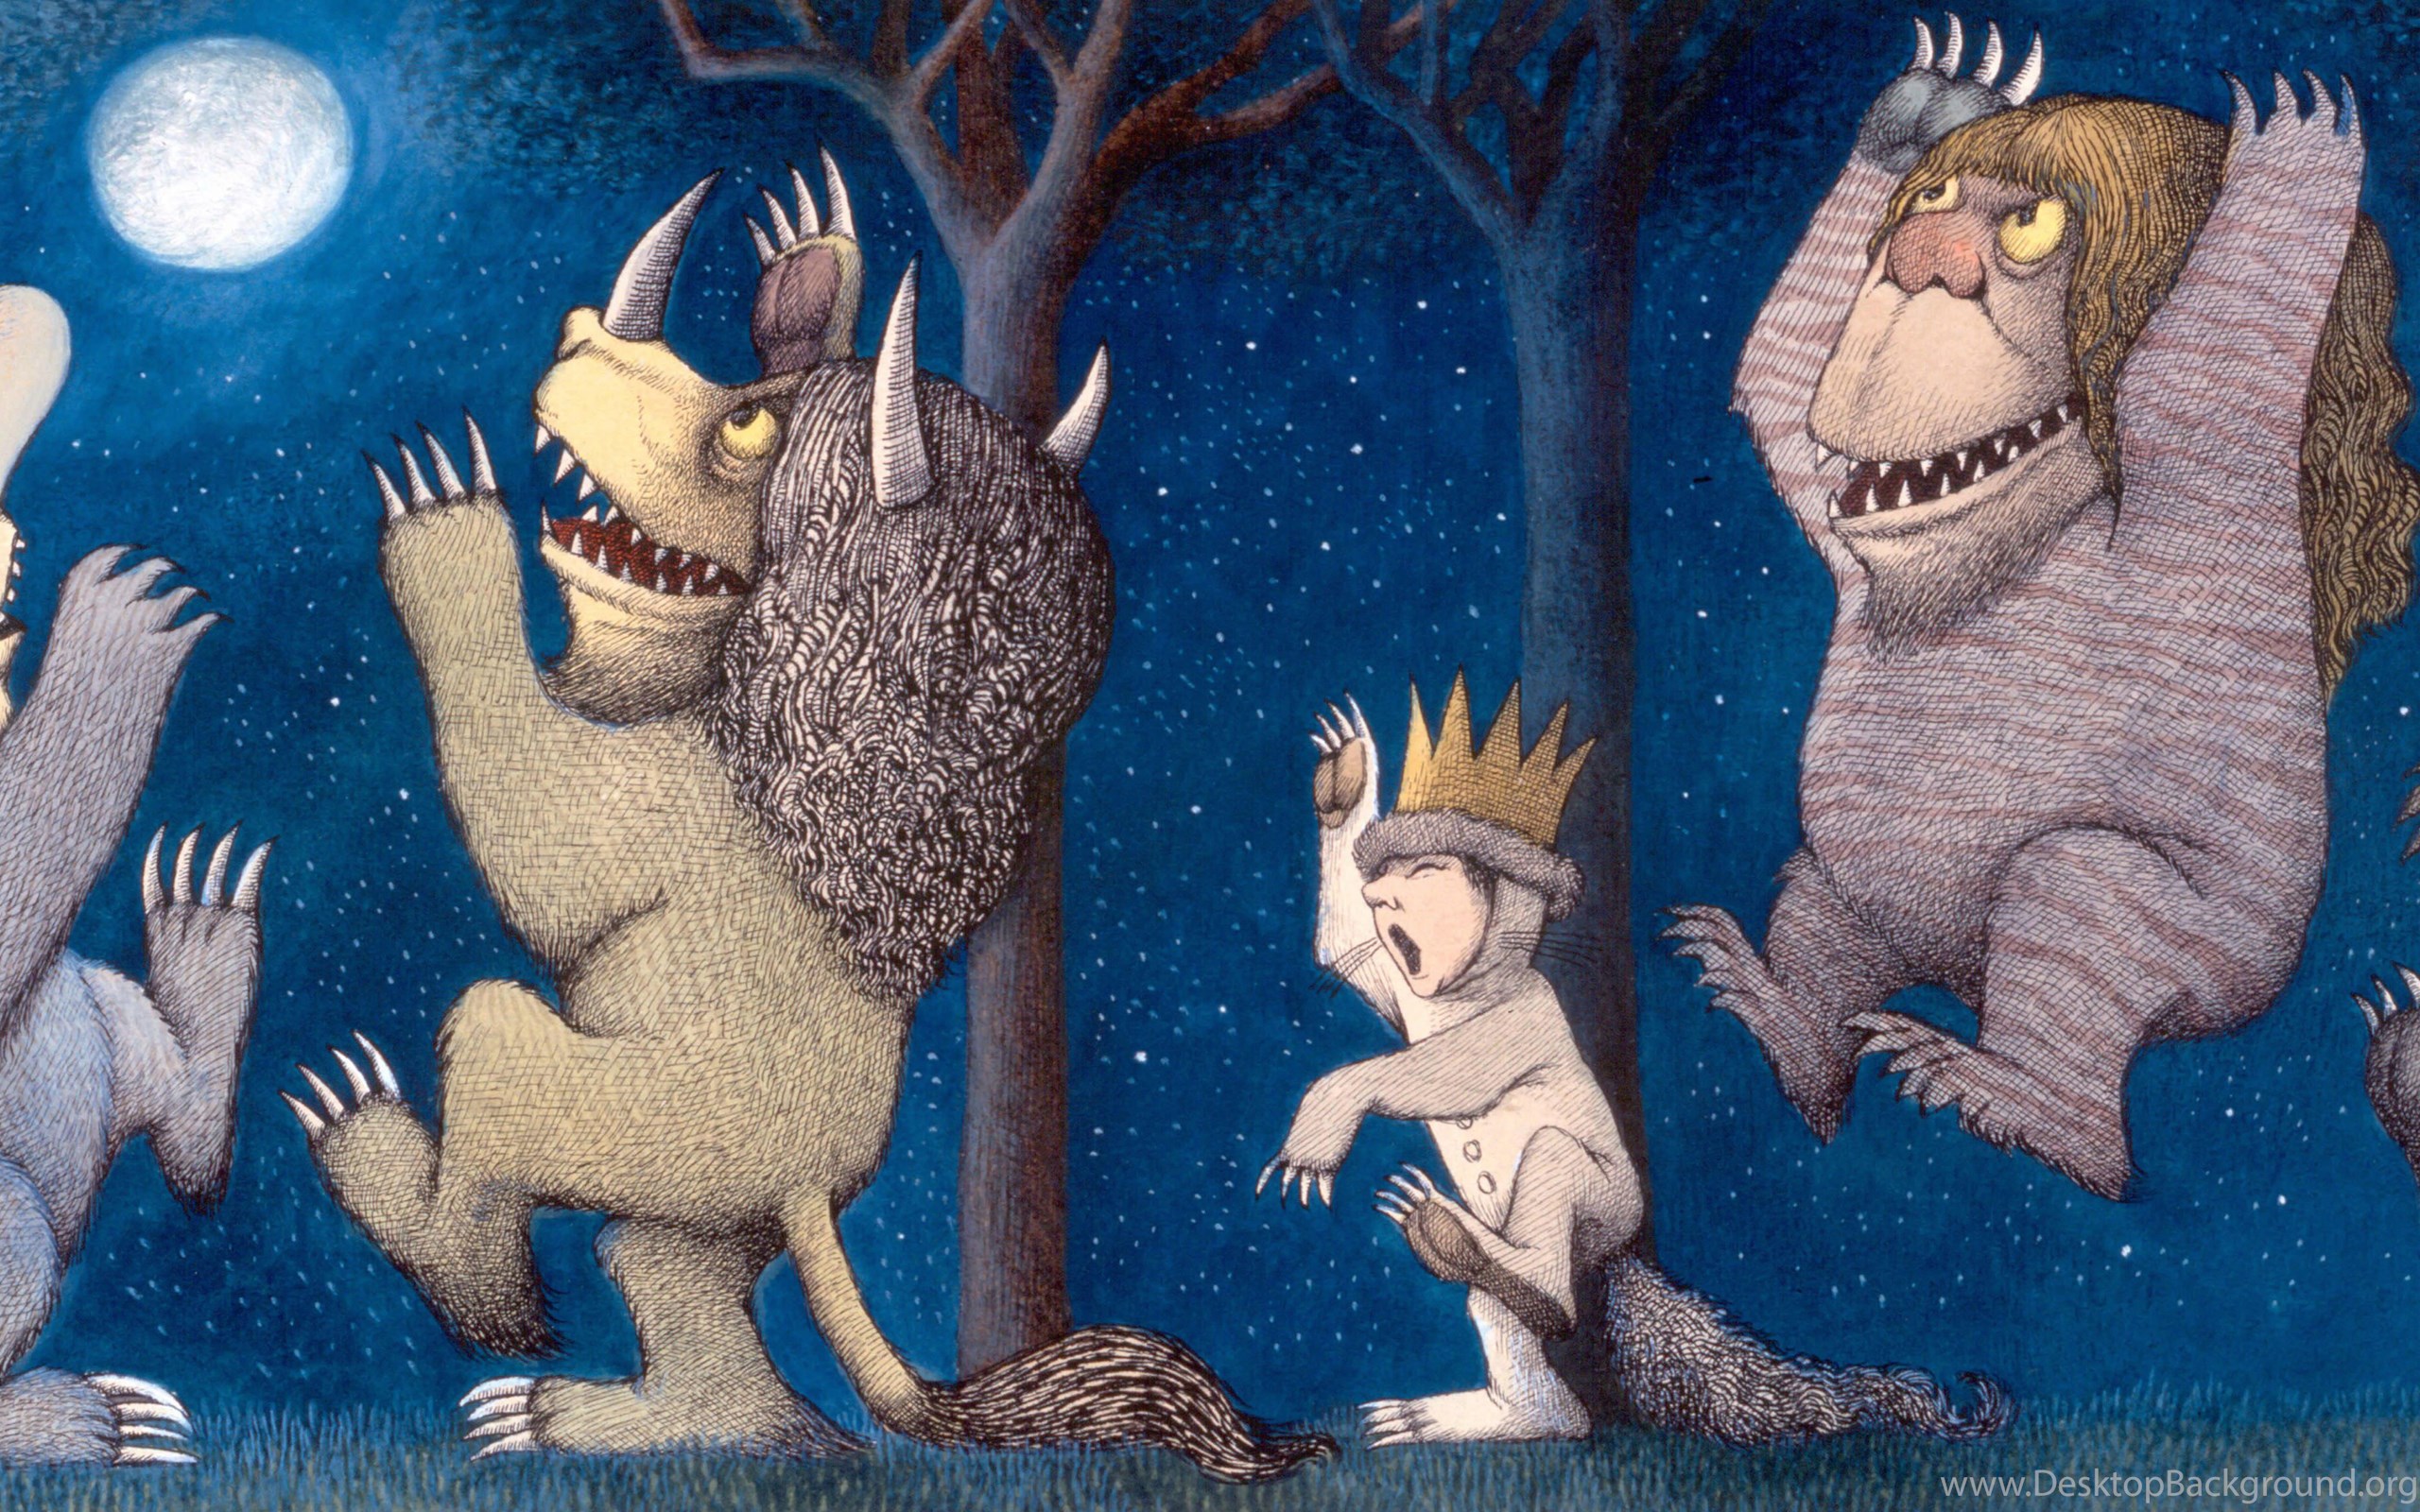 Download 16 Quality Where The Wild Things Are Wallpapers, TV & Movies W...